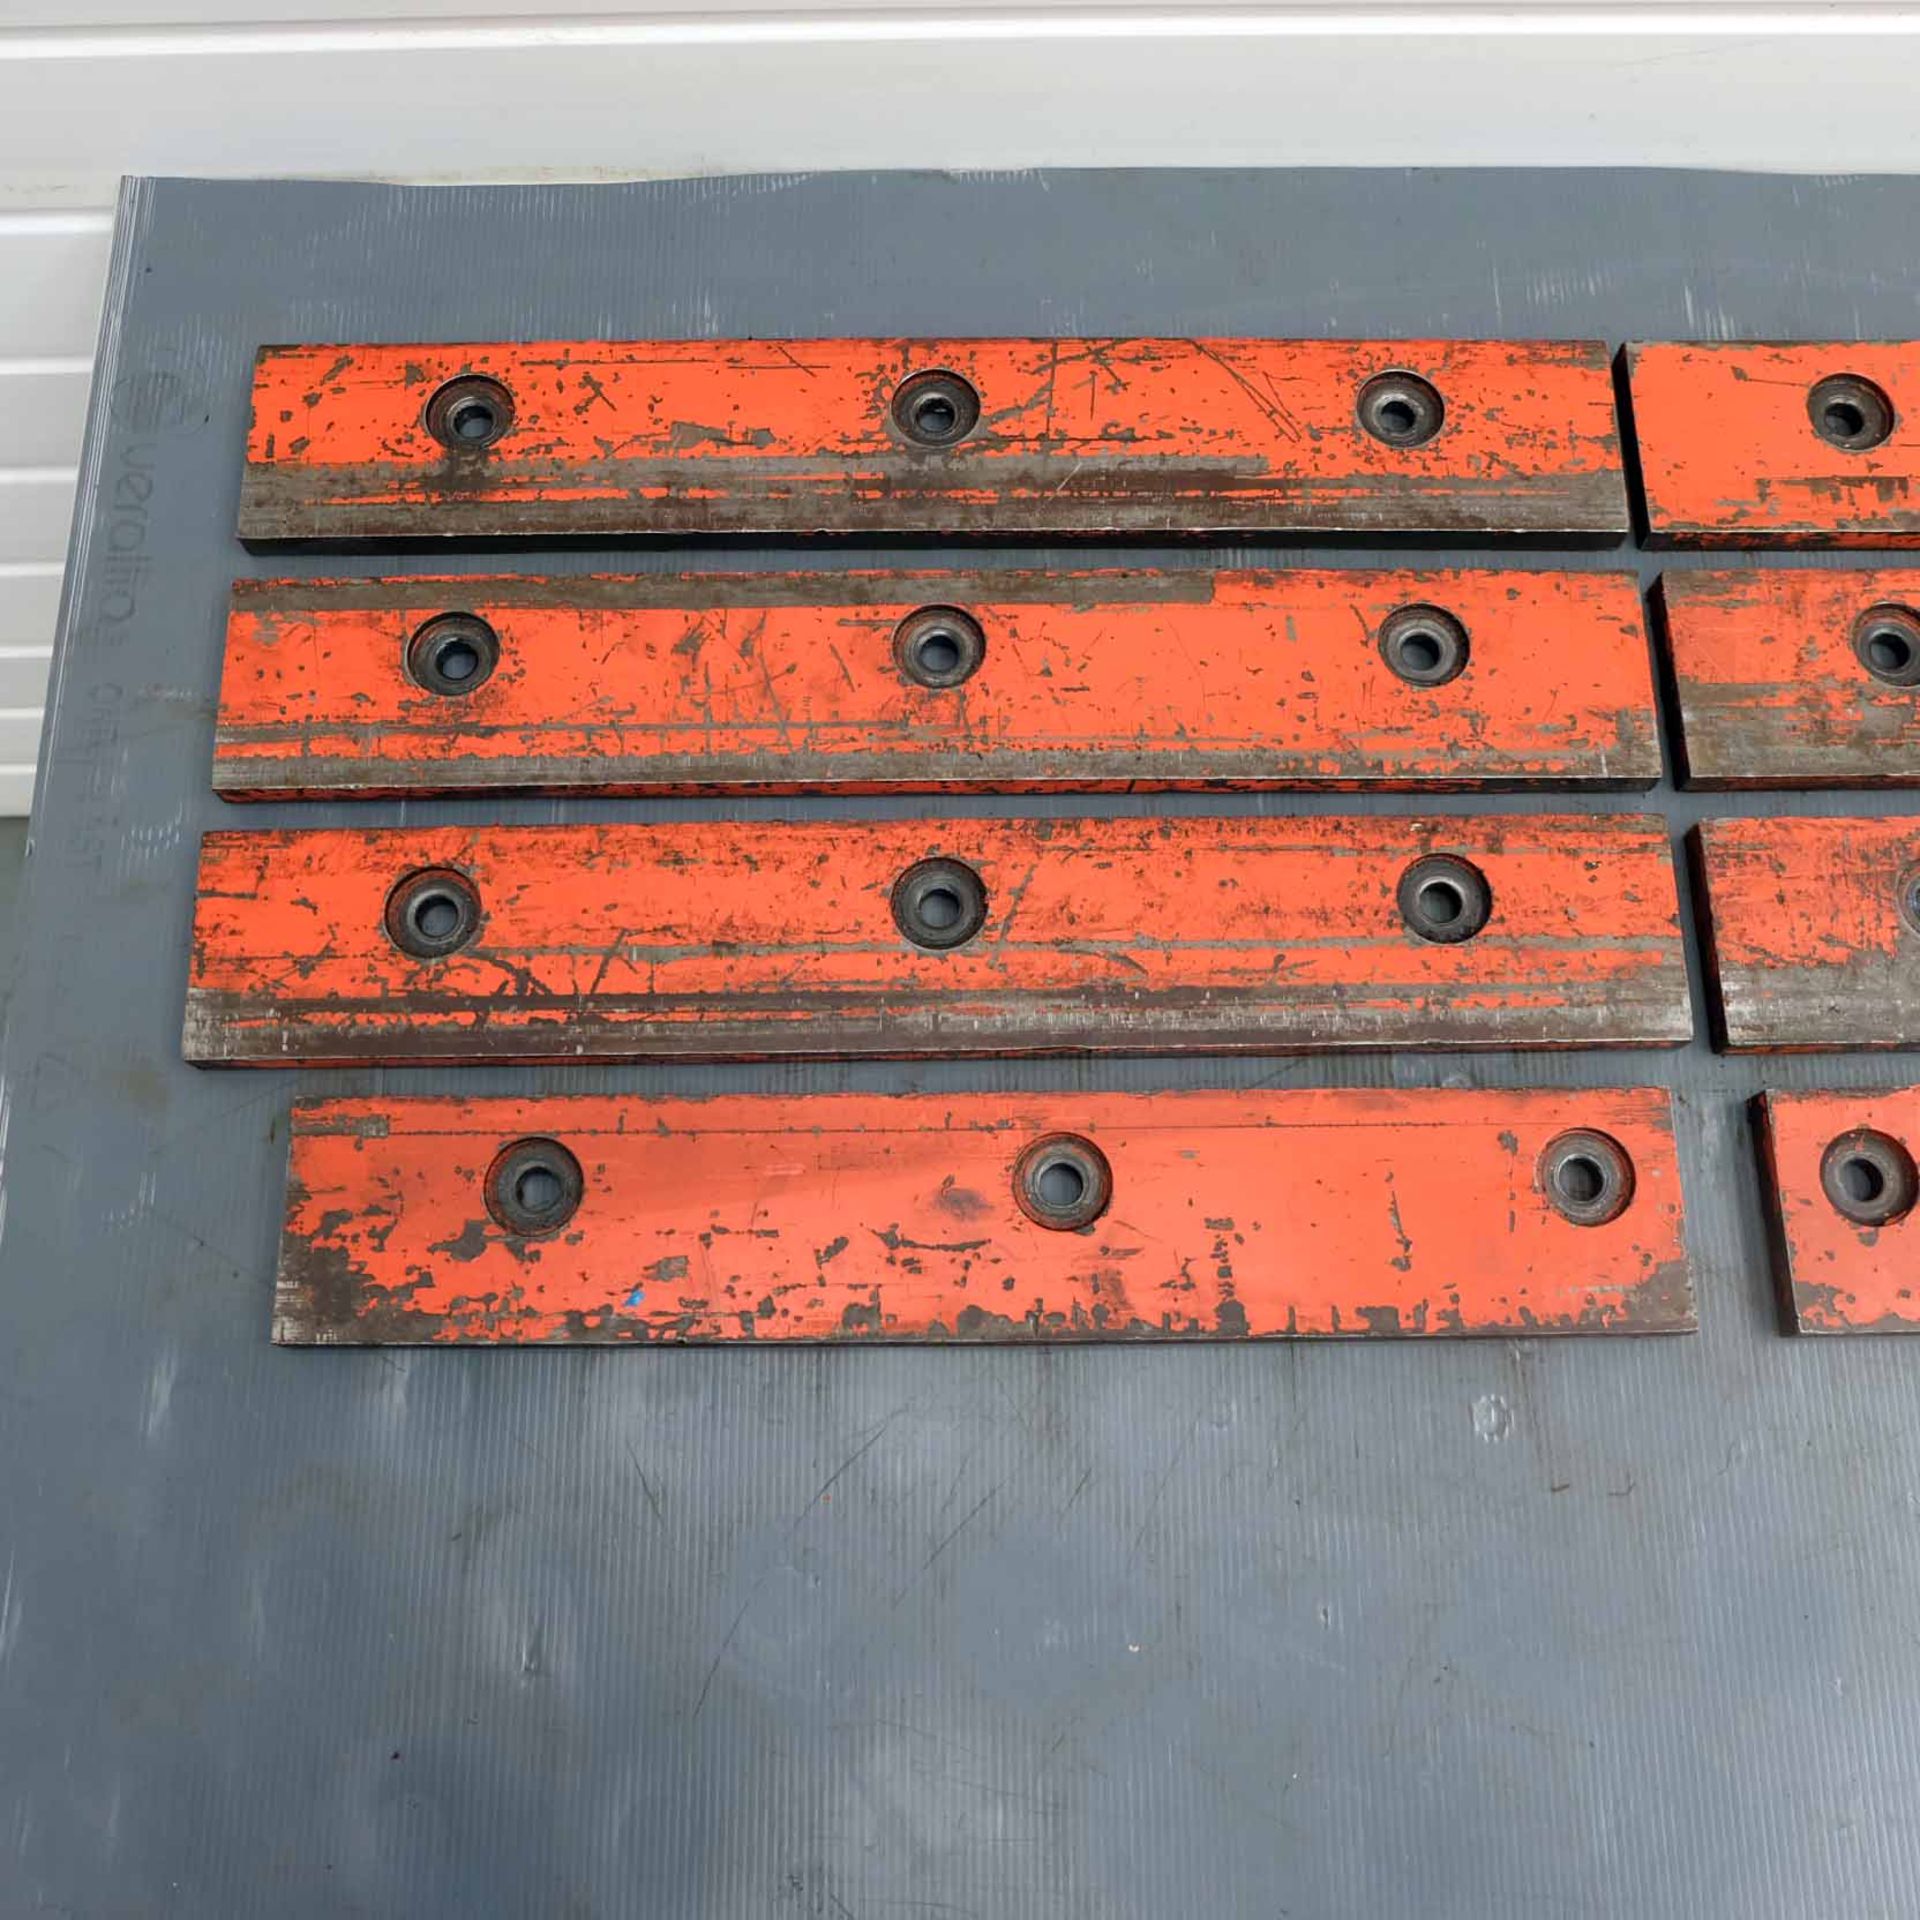 Set of 7 Top Tool Clamps for Press Brakes. 6 x 500mm Long. 2 x 450mm Long. - Image 4 of 5